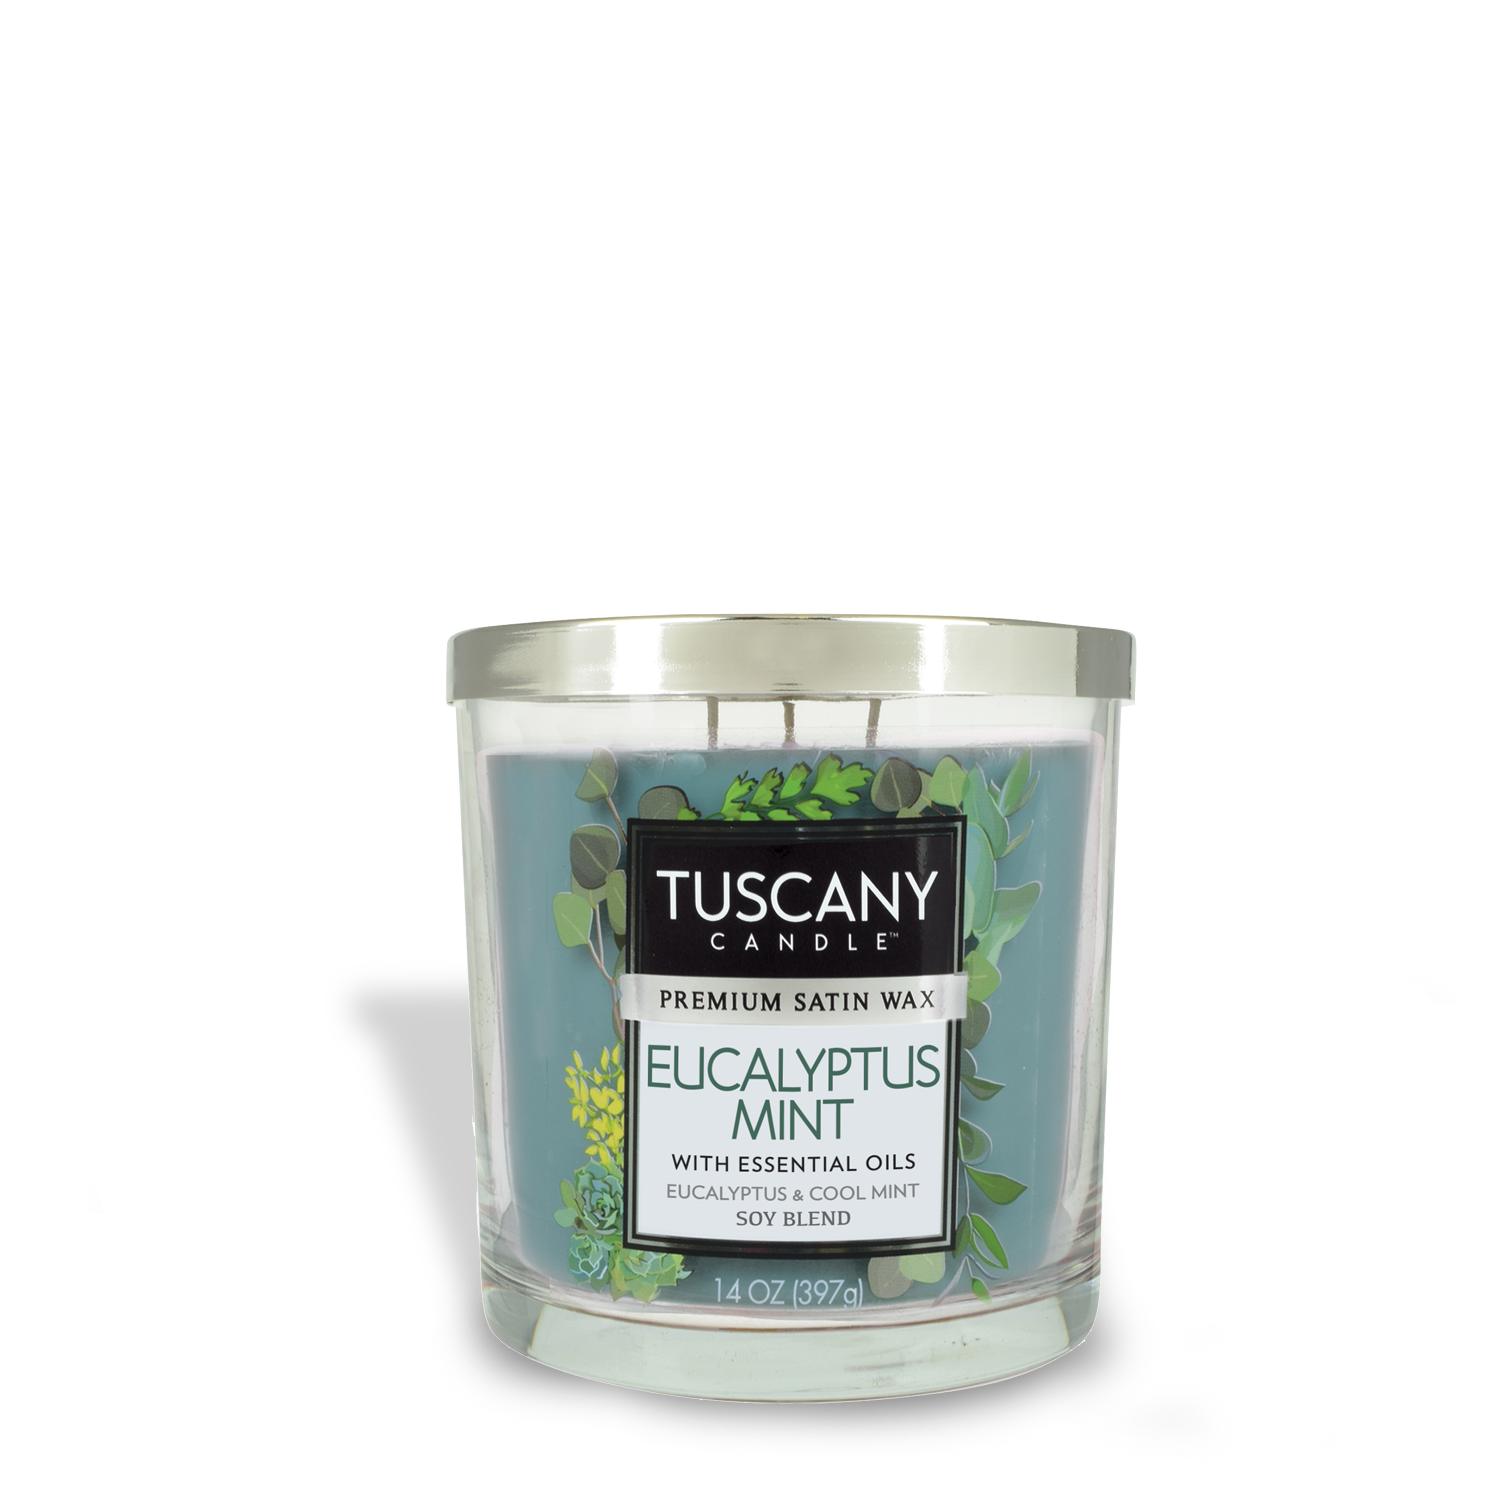 Tuscany Eucalyptus Mint Long-Lasting Scented Jar Candle (14 oz) with a refreshing aroma.